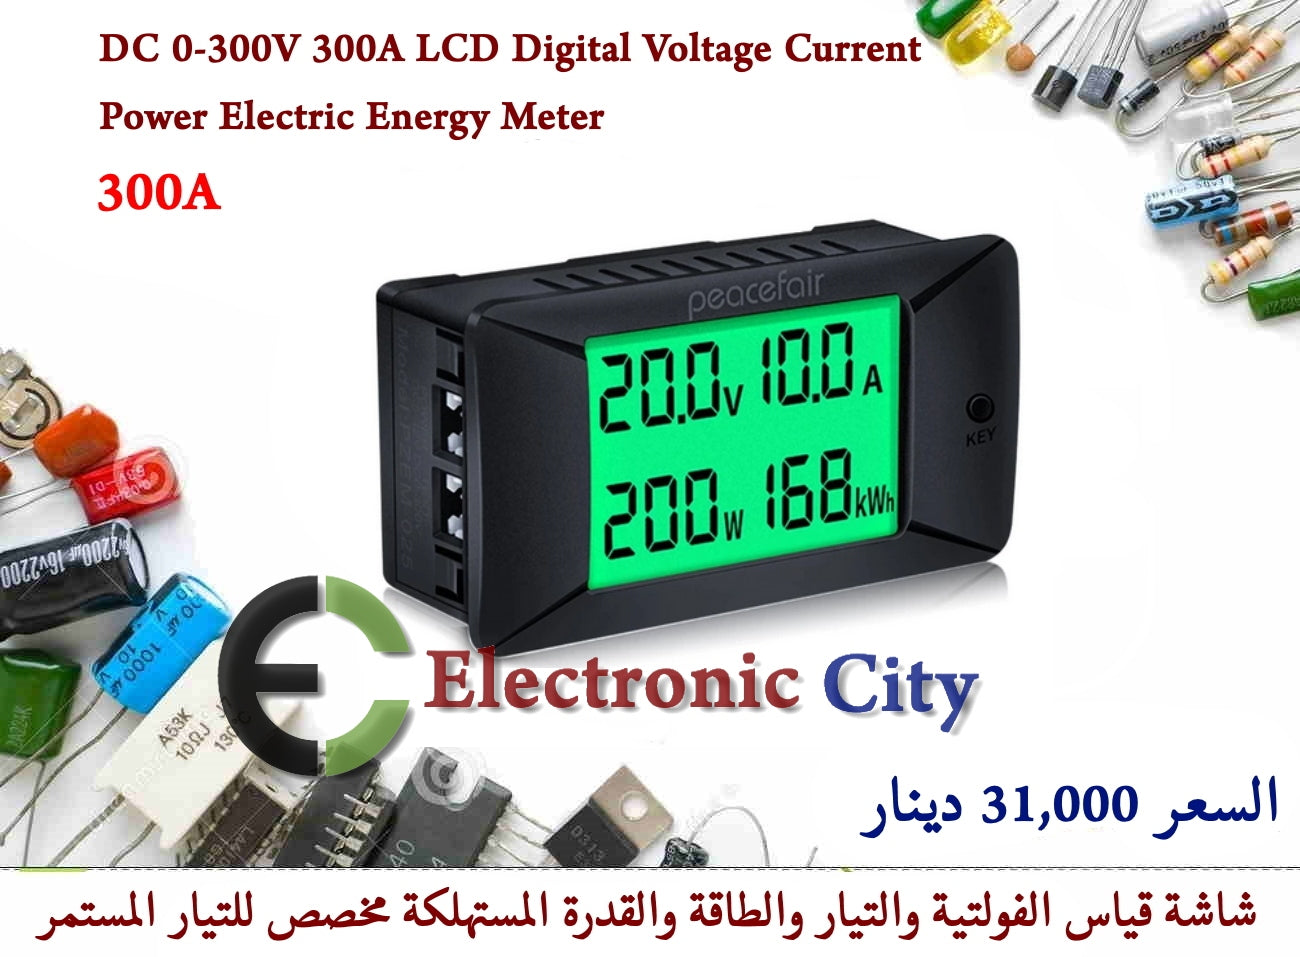 DC 0-300V 300A LCD Digital Voltage Current Power Electric Energy Meter